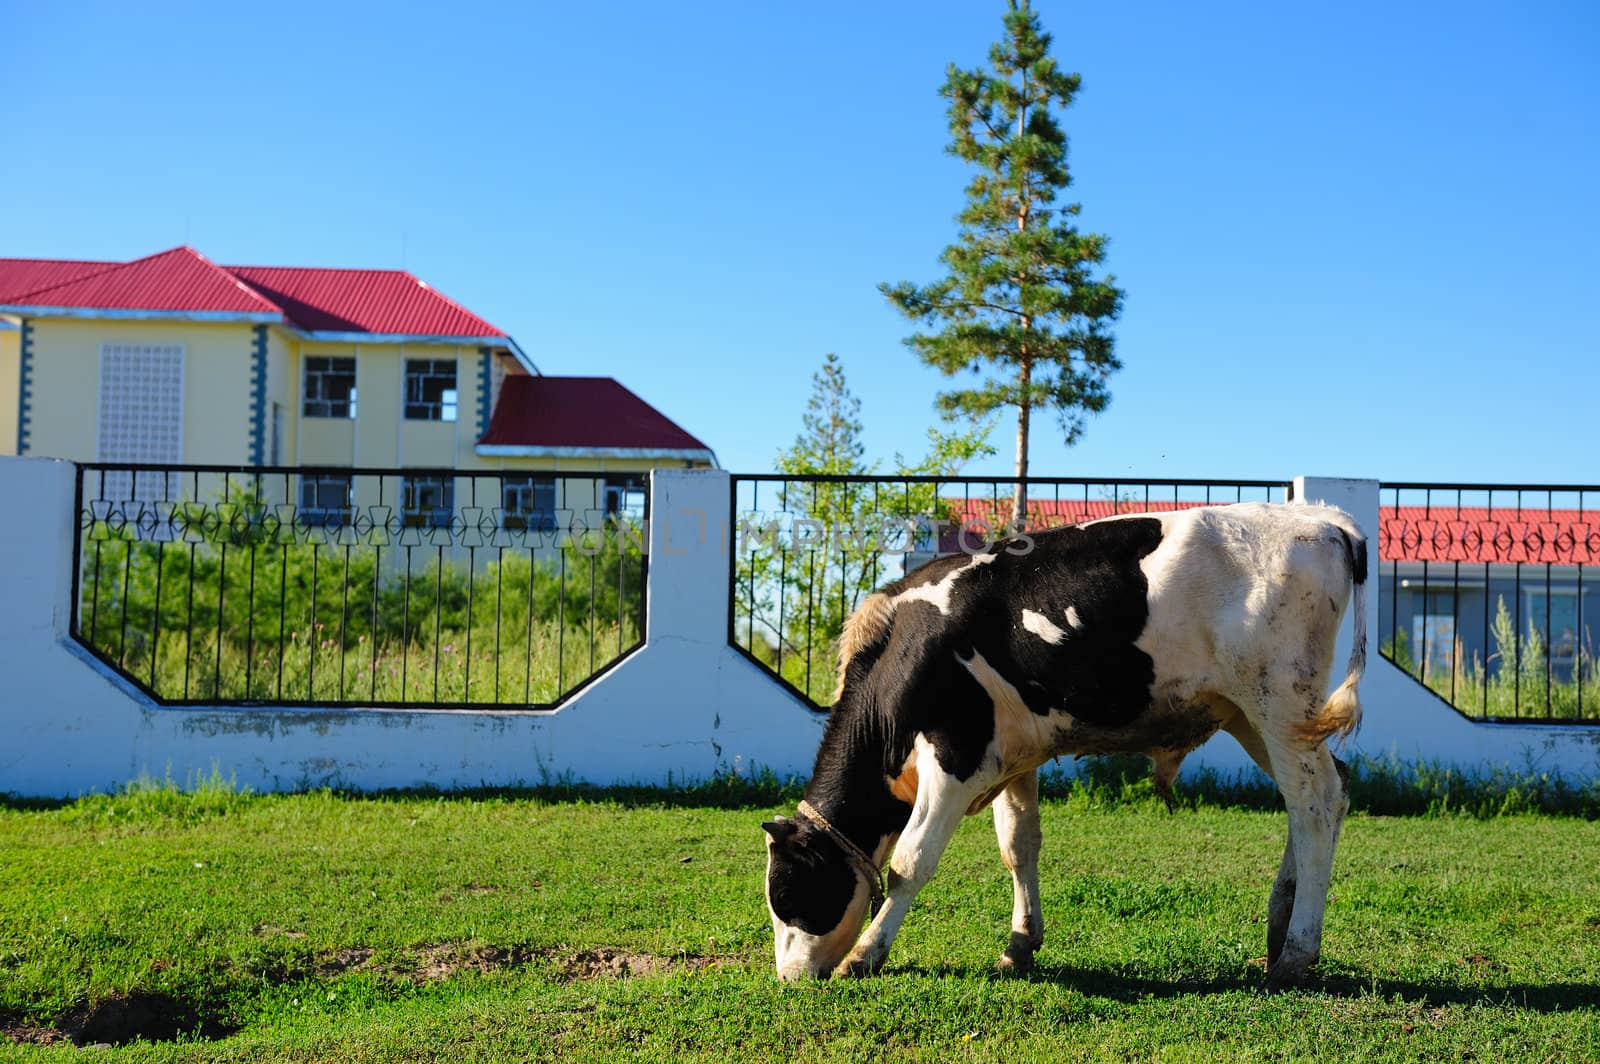 Cow grazing on the lawn near the yard